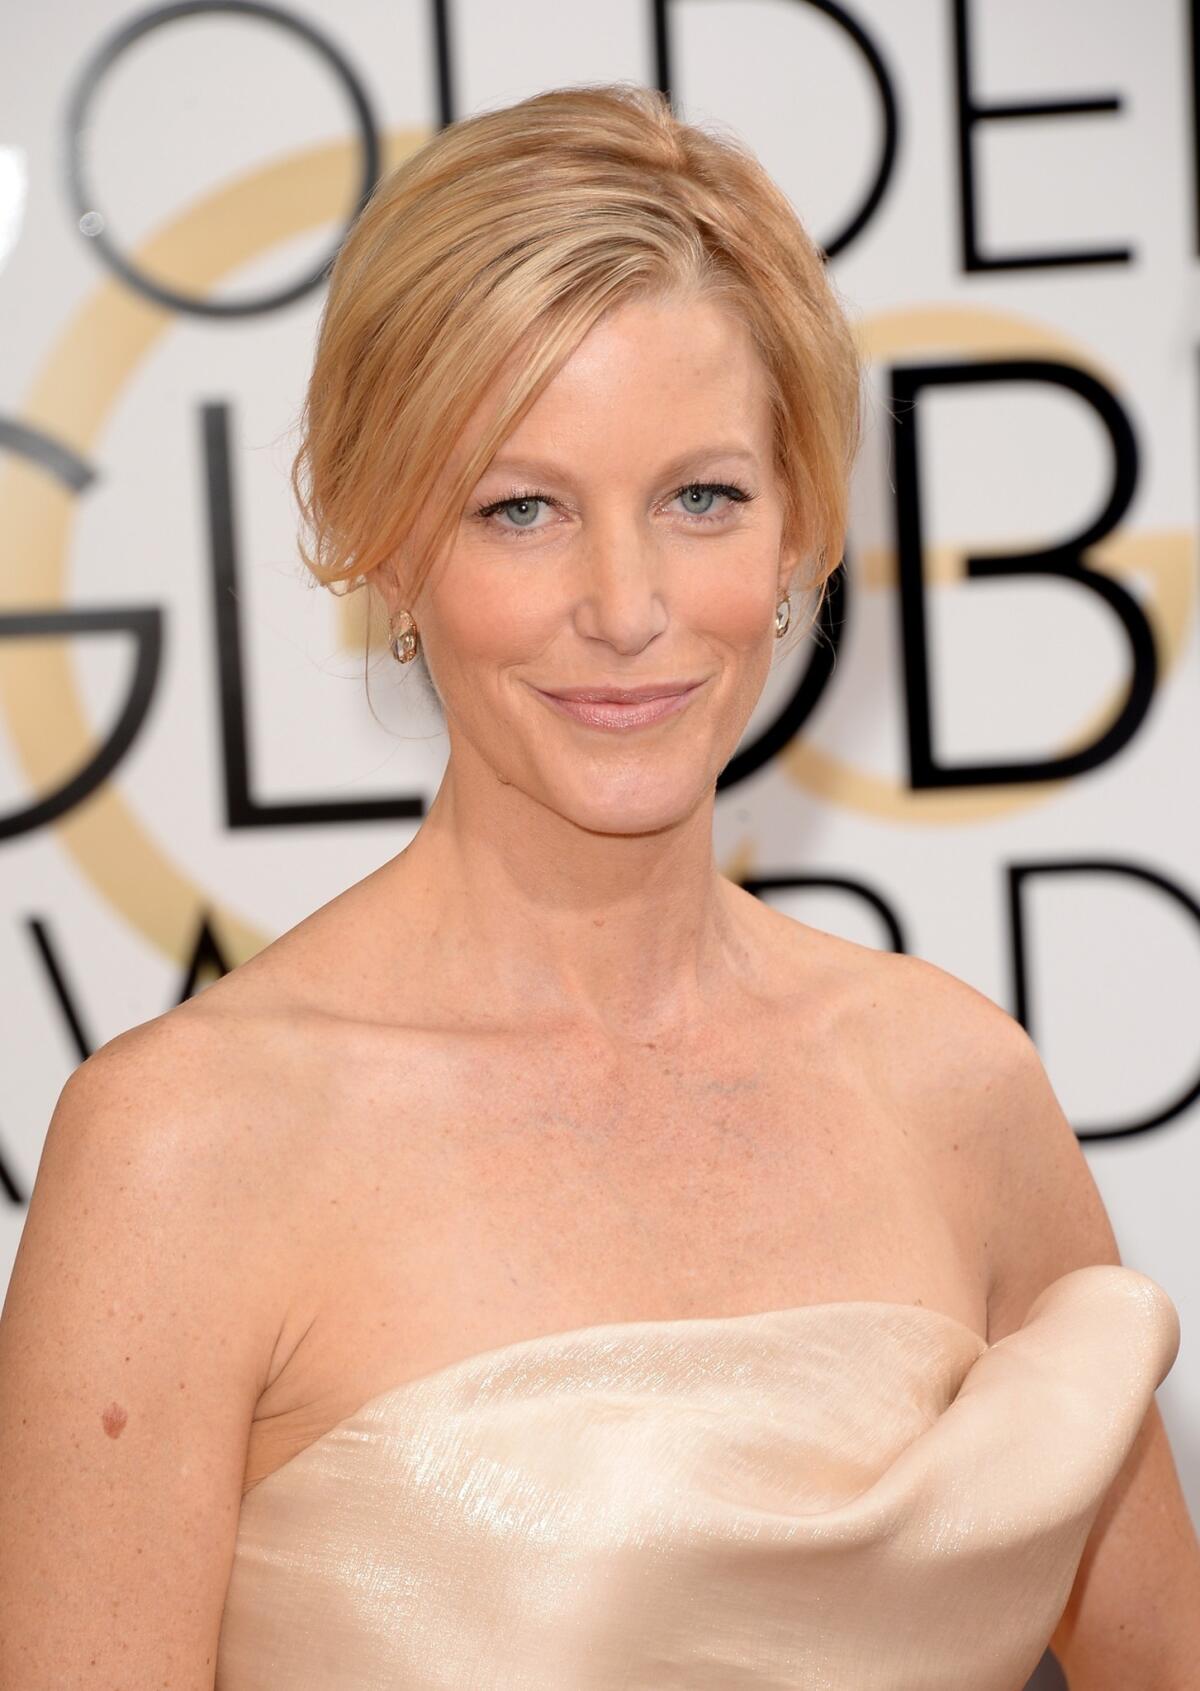 "Breaking Bad" actress Anna Gunn walks the red carpet with a chic updo for Sunday's Golden Globes.